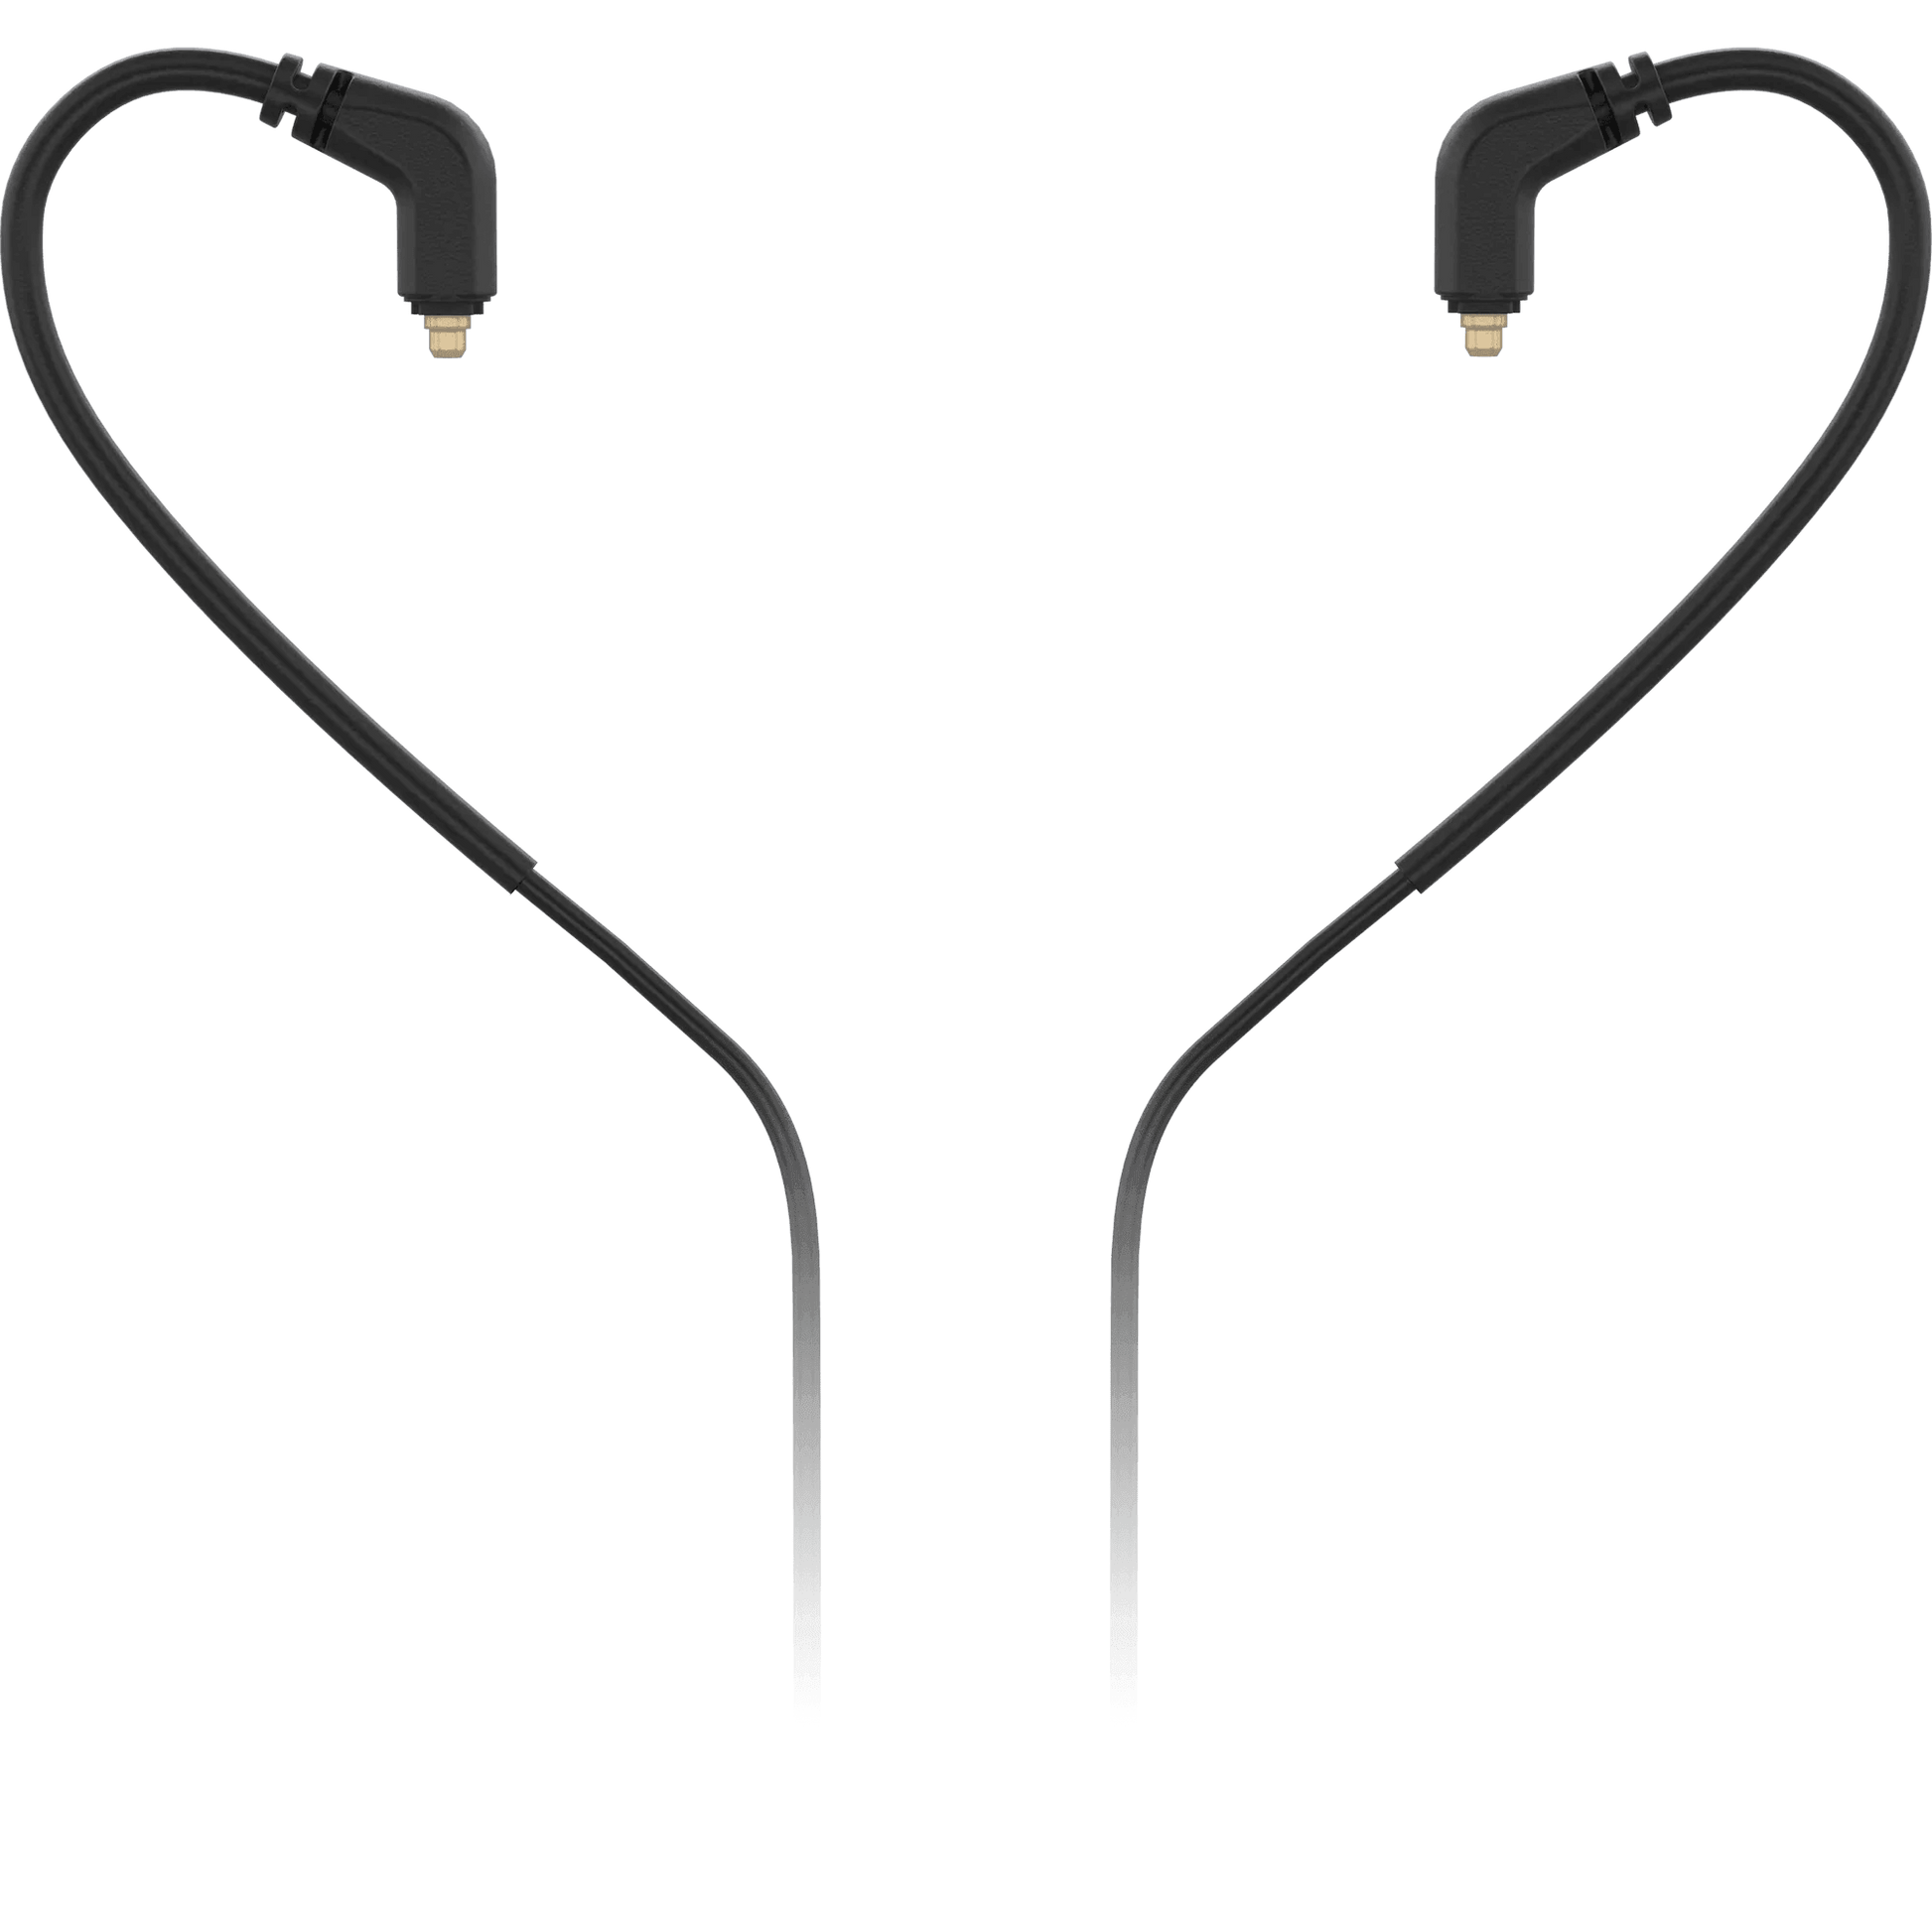 Behringer BT251-BK Bluetooth* Wireless Adaptor for In-Ear Monitors with MMCX Connectors